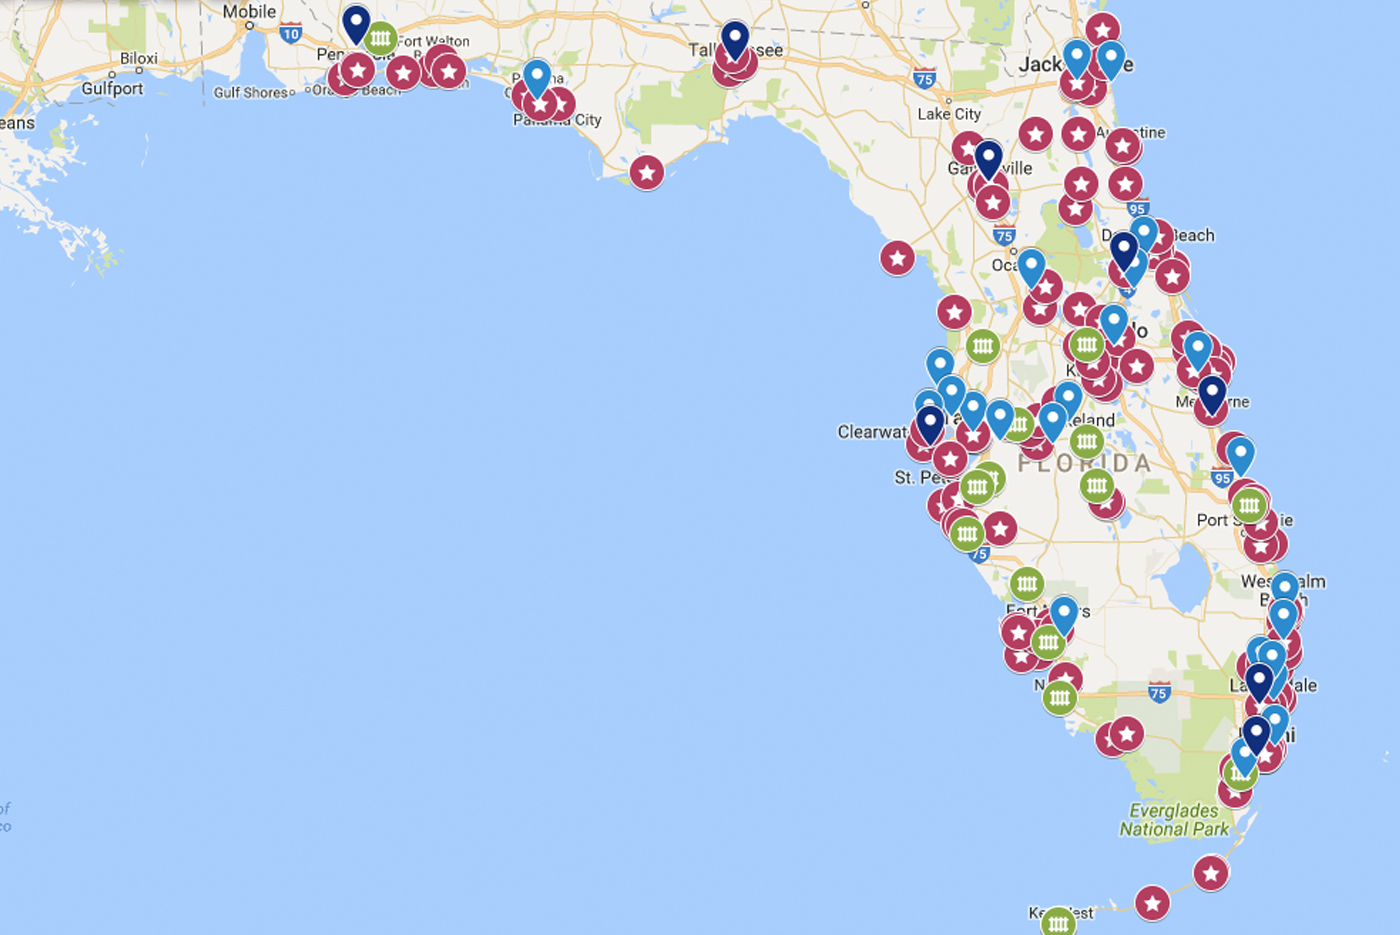 Map of Science Museums in Florida and 3D Printing Libraries